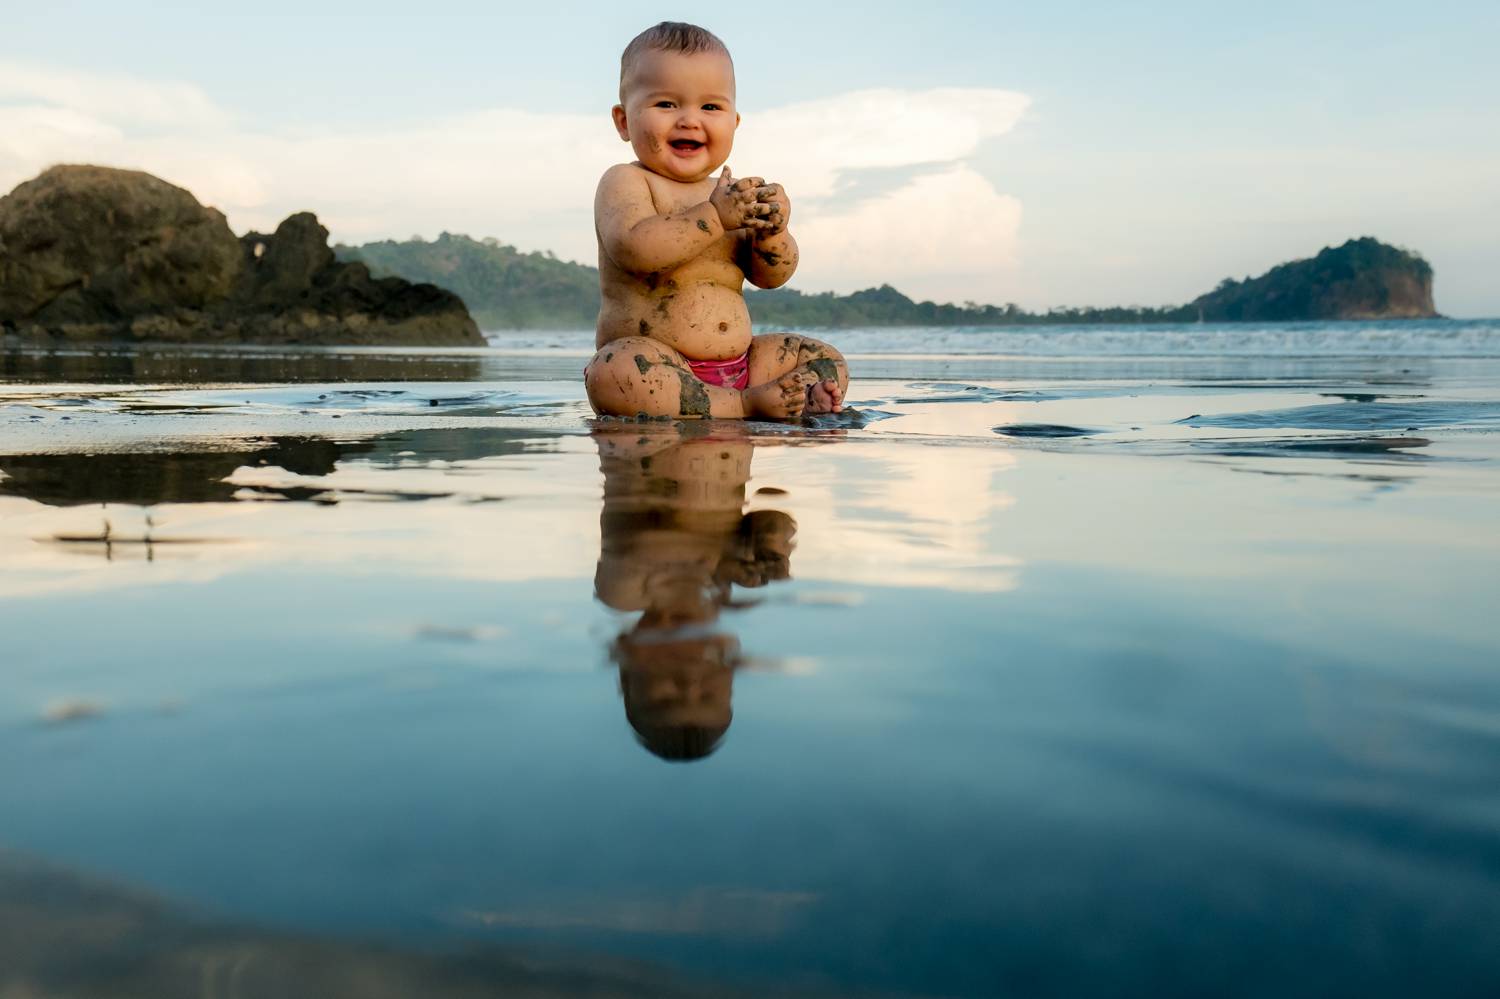 Customer Experience: A photo by Kevin Heslin depicts a baby sitting on a beach surrounded by reflective puddles of water.